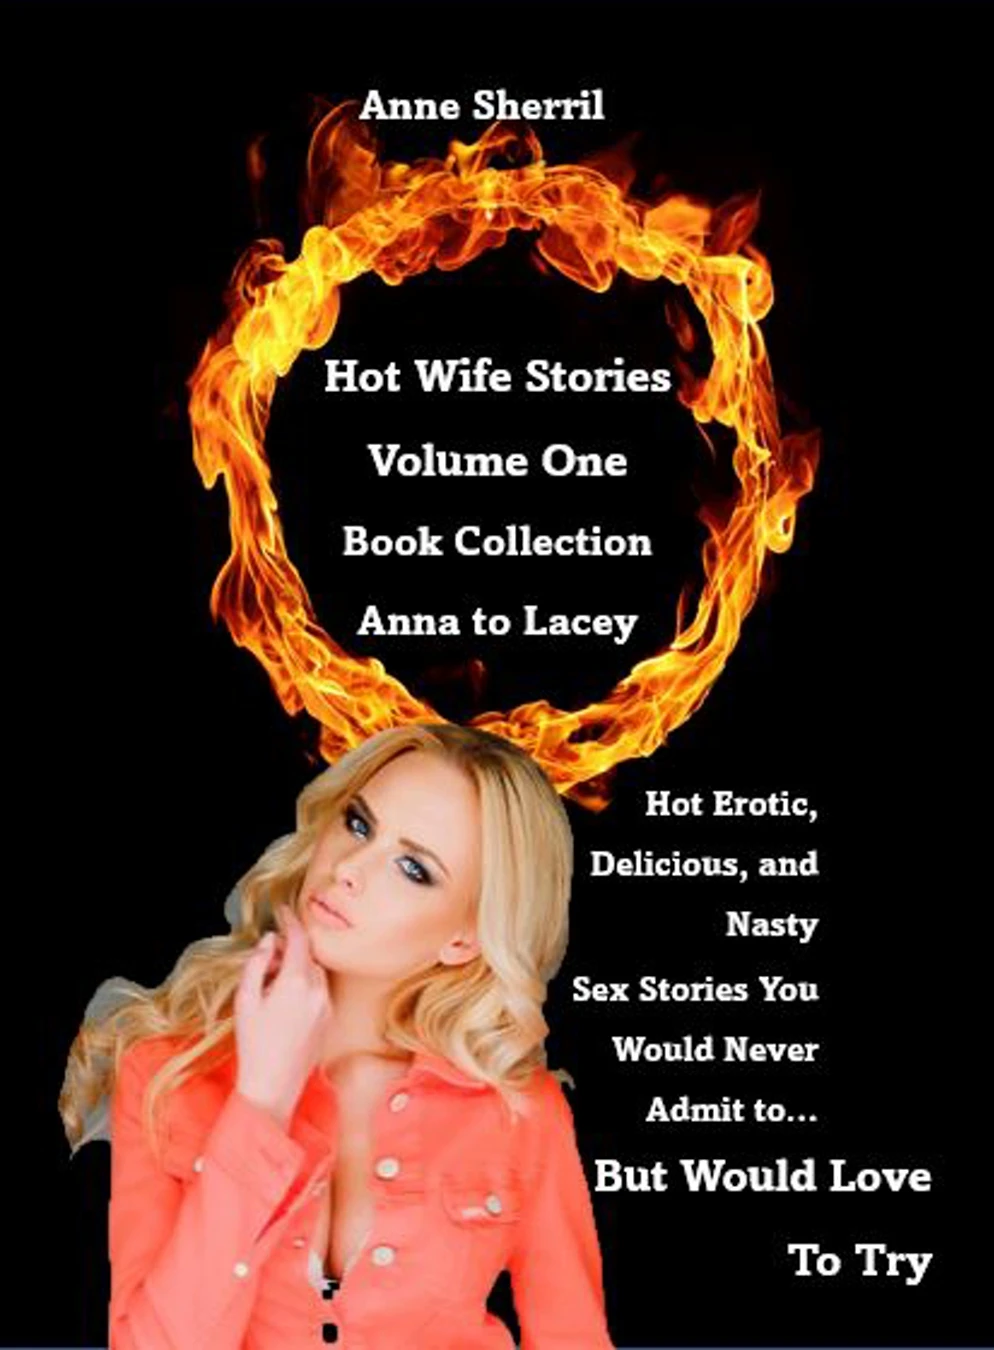 Hotwife Stories Collector’s Edition⸟ Volume One